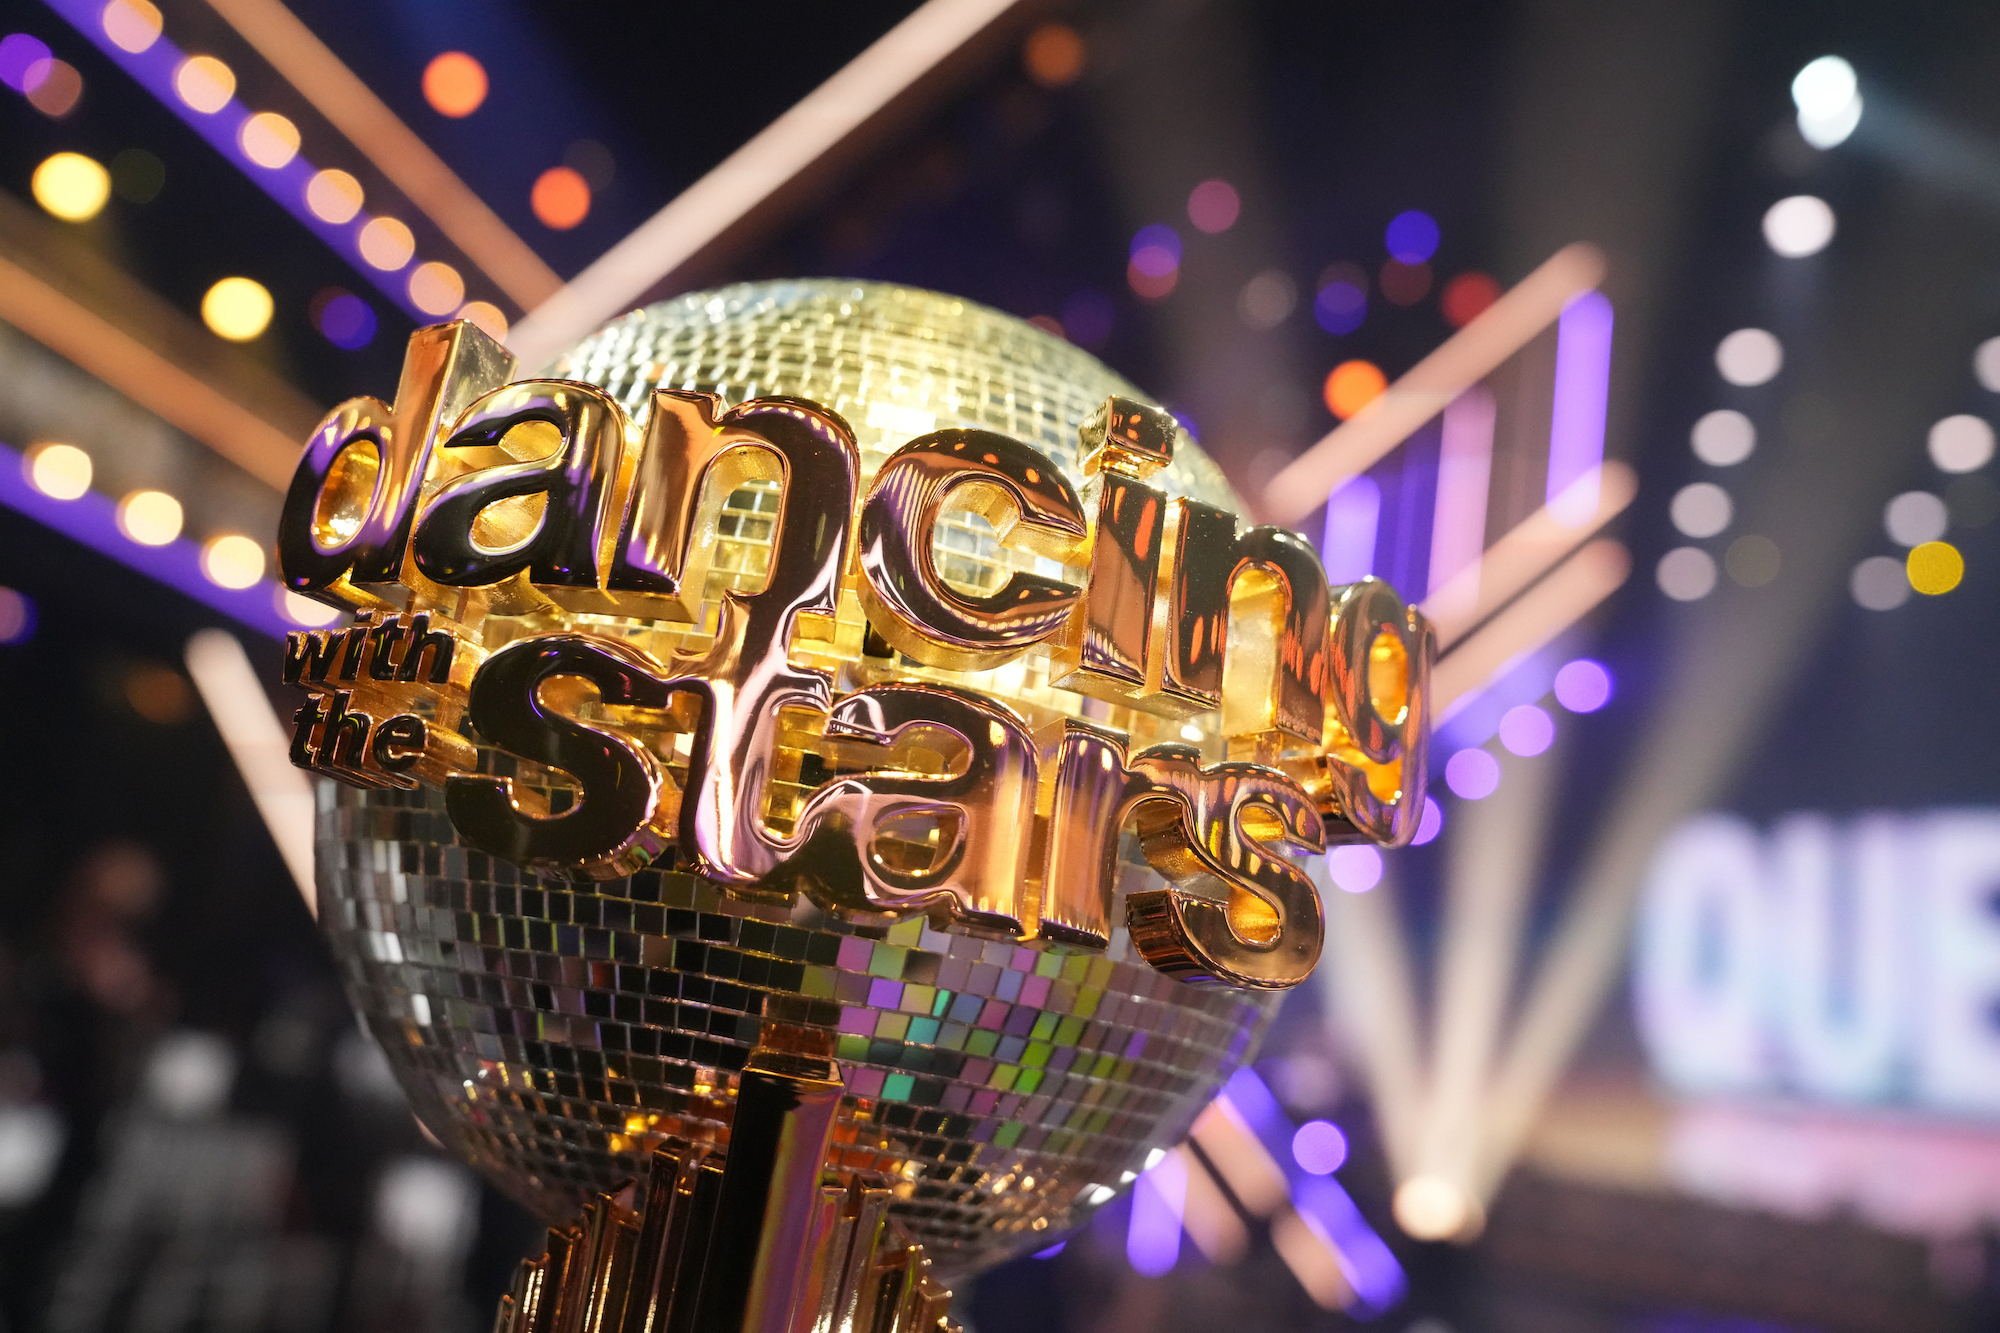 PHOTO: A photo of the Mirror ball trophy for "Dancing with the Stars," is seen here.